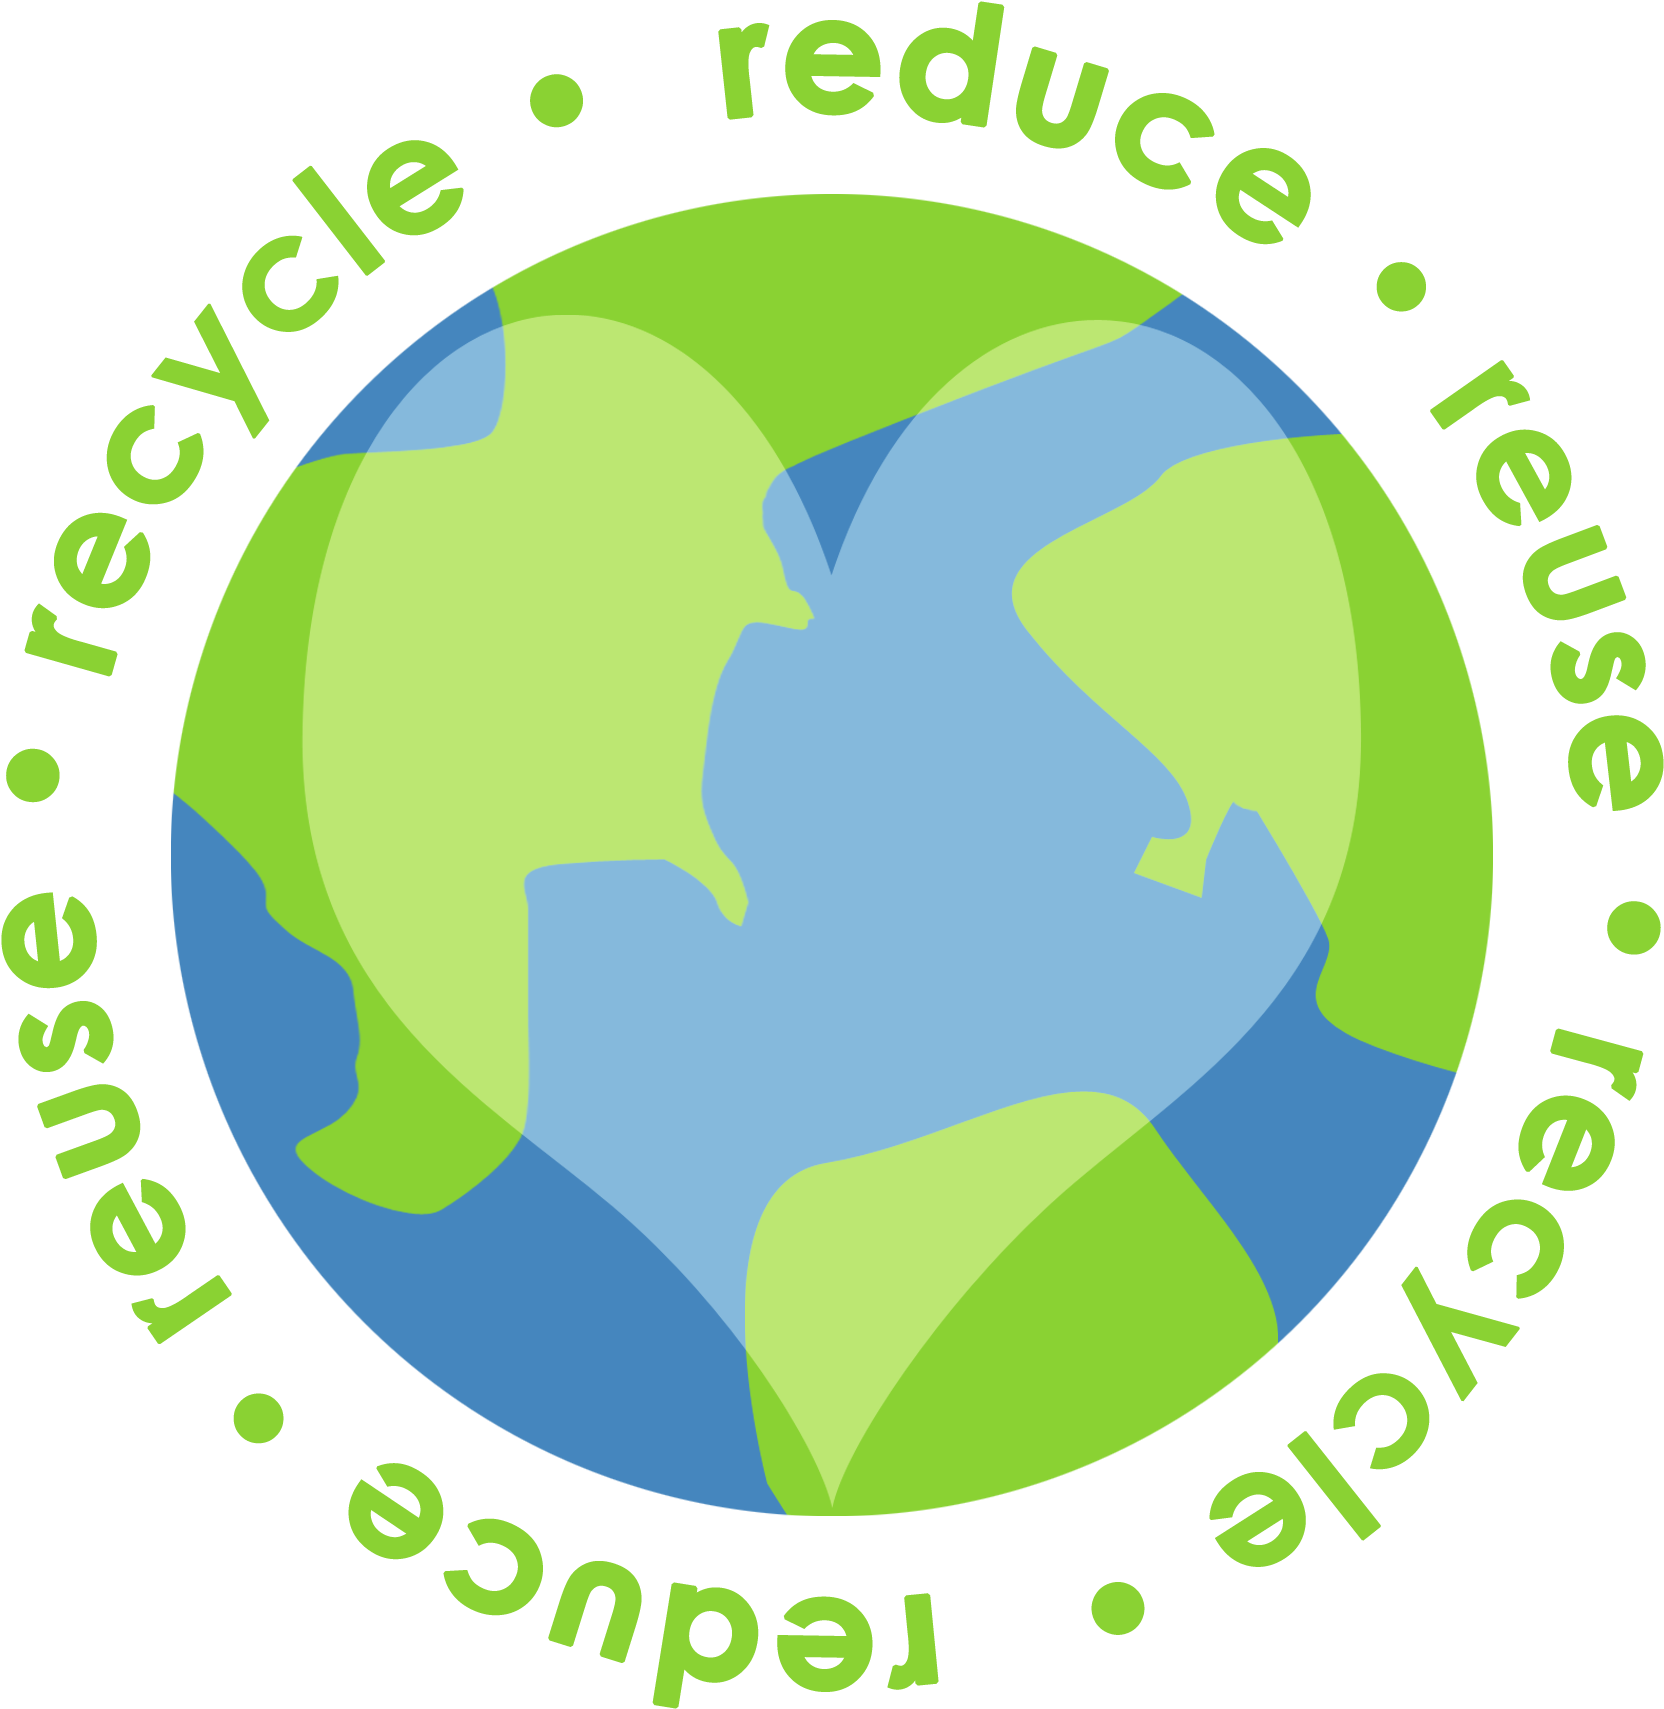 Reduce Reuse Recycle Symbol - Aman Bhalla Institute Of Engineering & Technology (1800x1800)